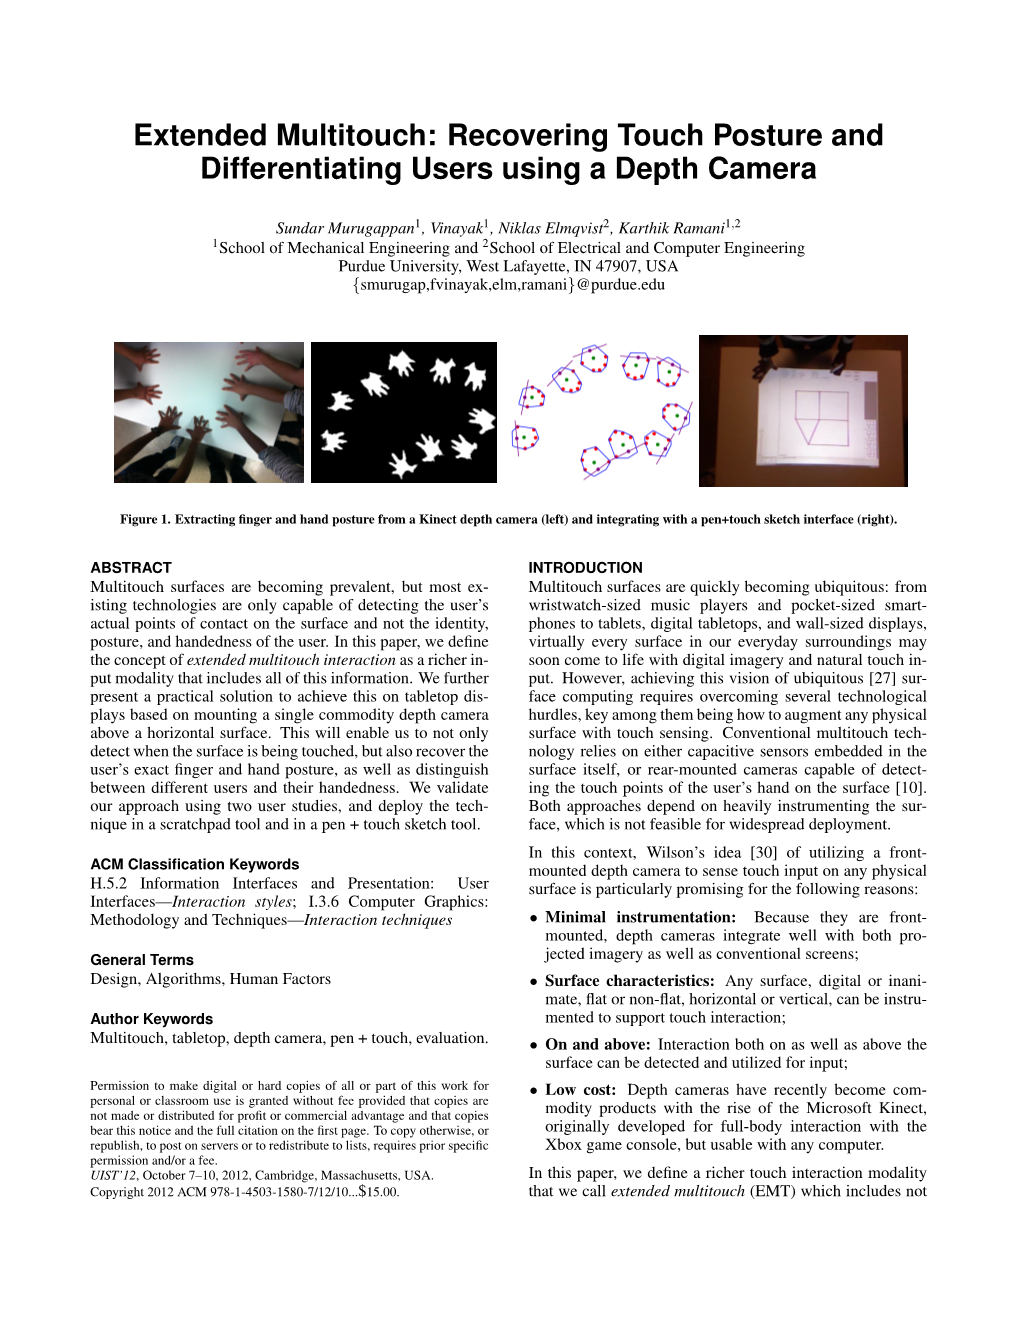 Extended Multitouch: Recovering Touch Posture and Differentiating Users Using a Depth Camera